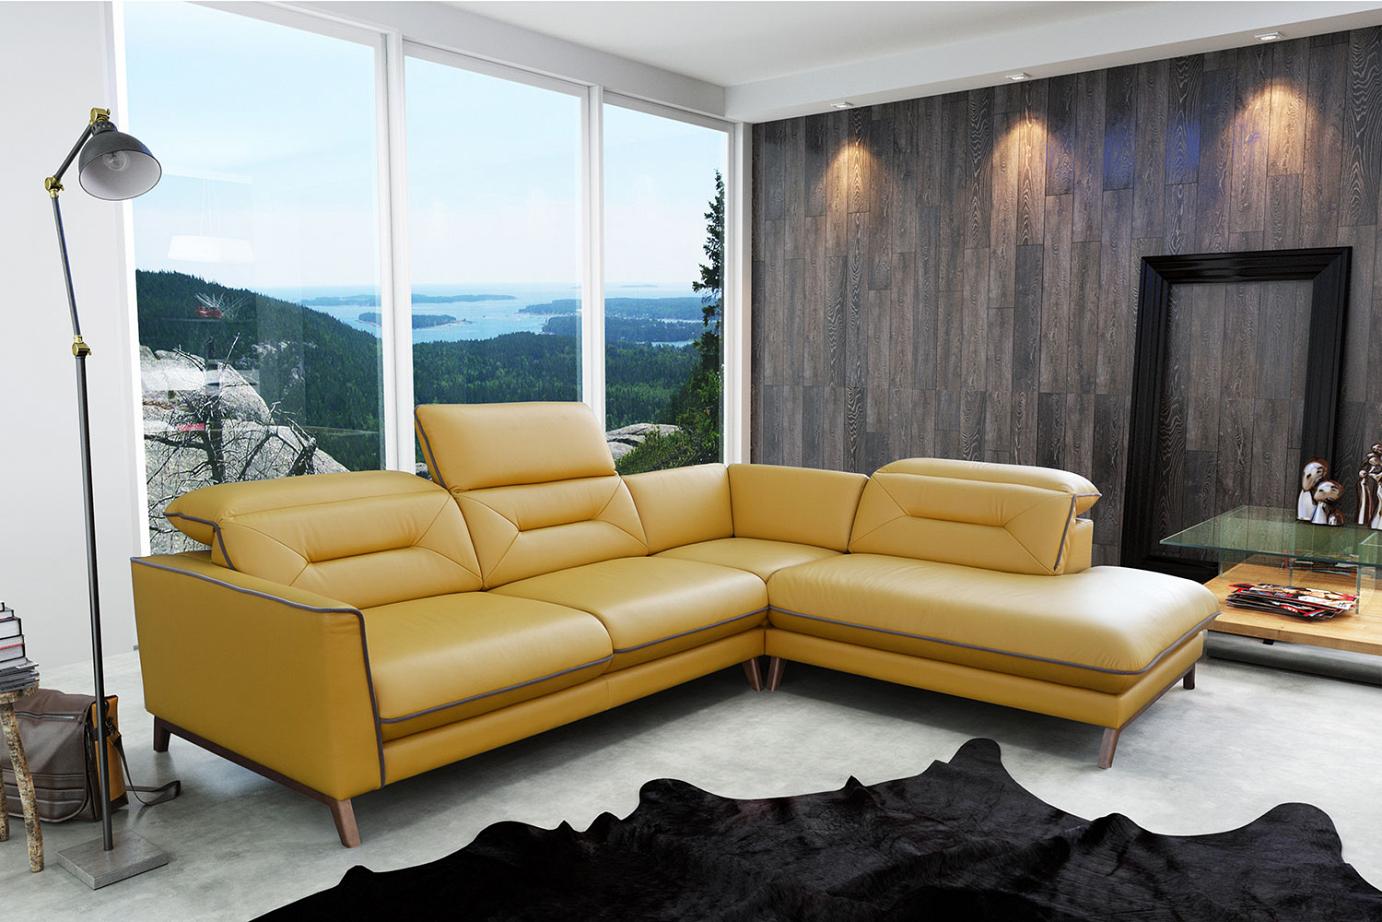 Retro styled sofa corner in the yellow natural leather